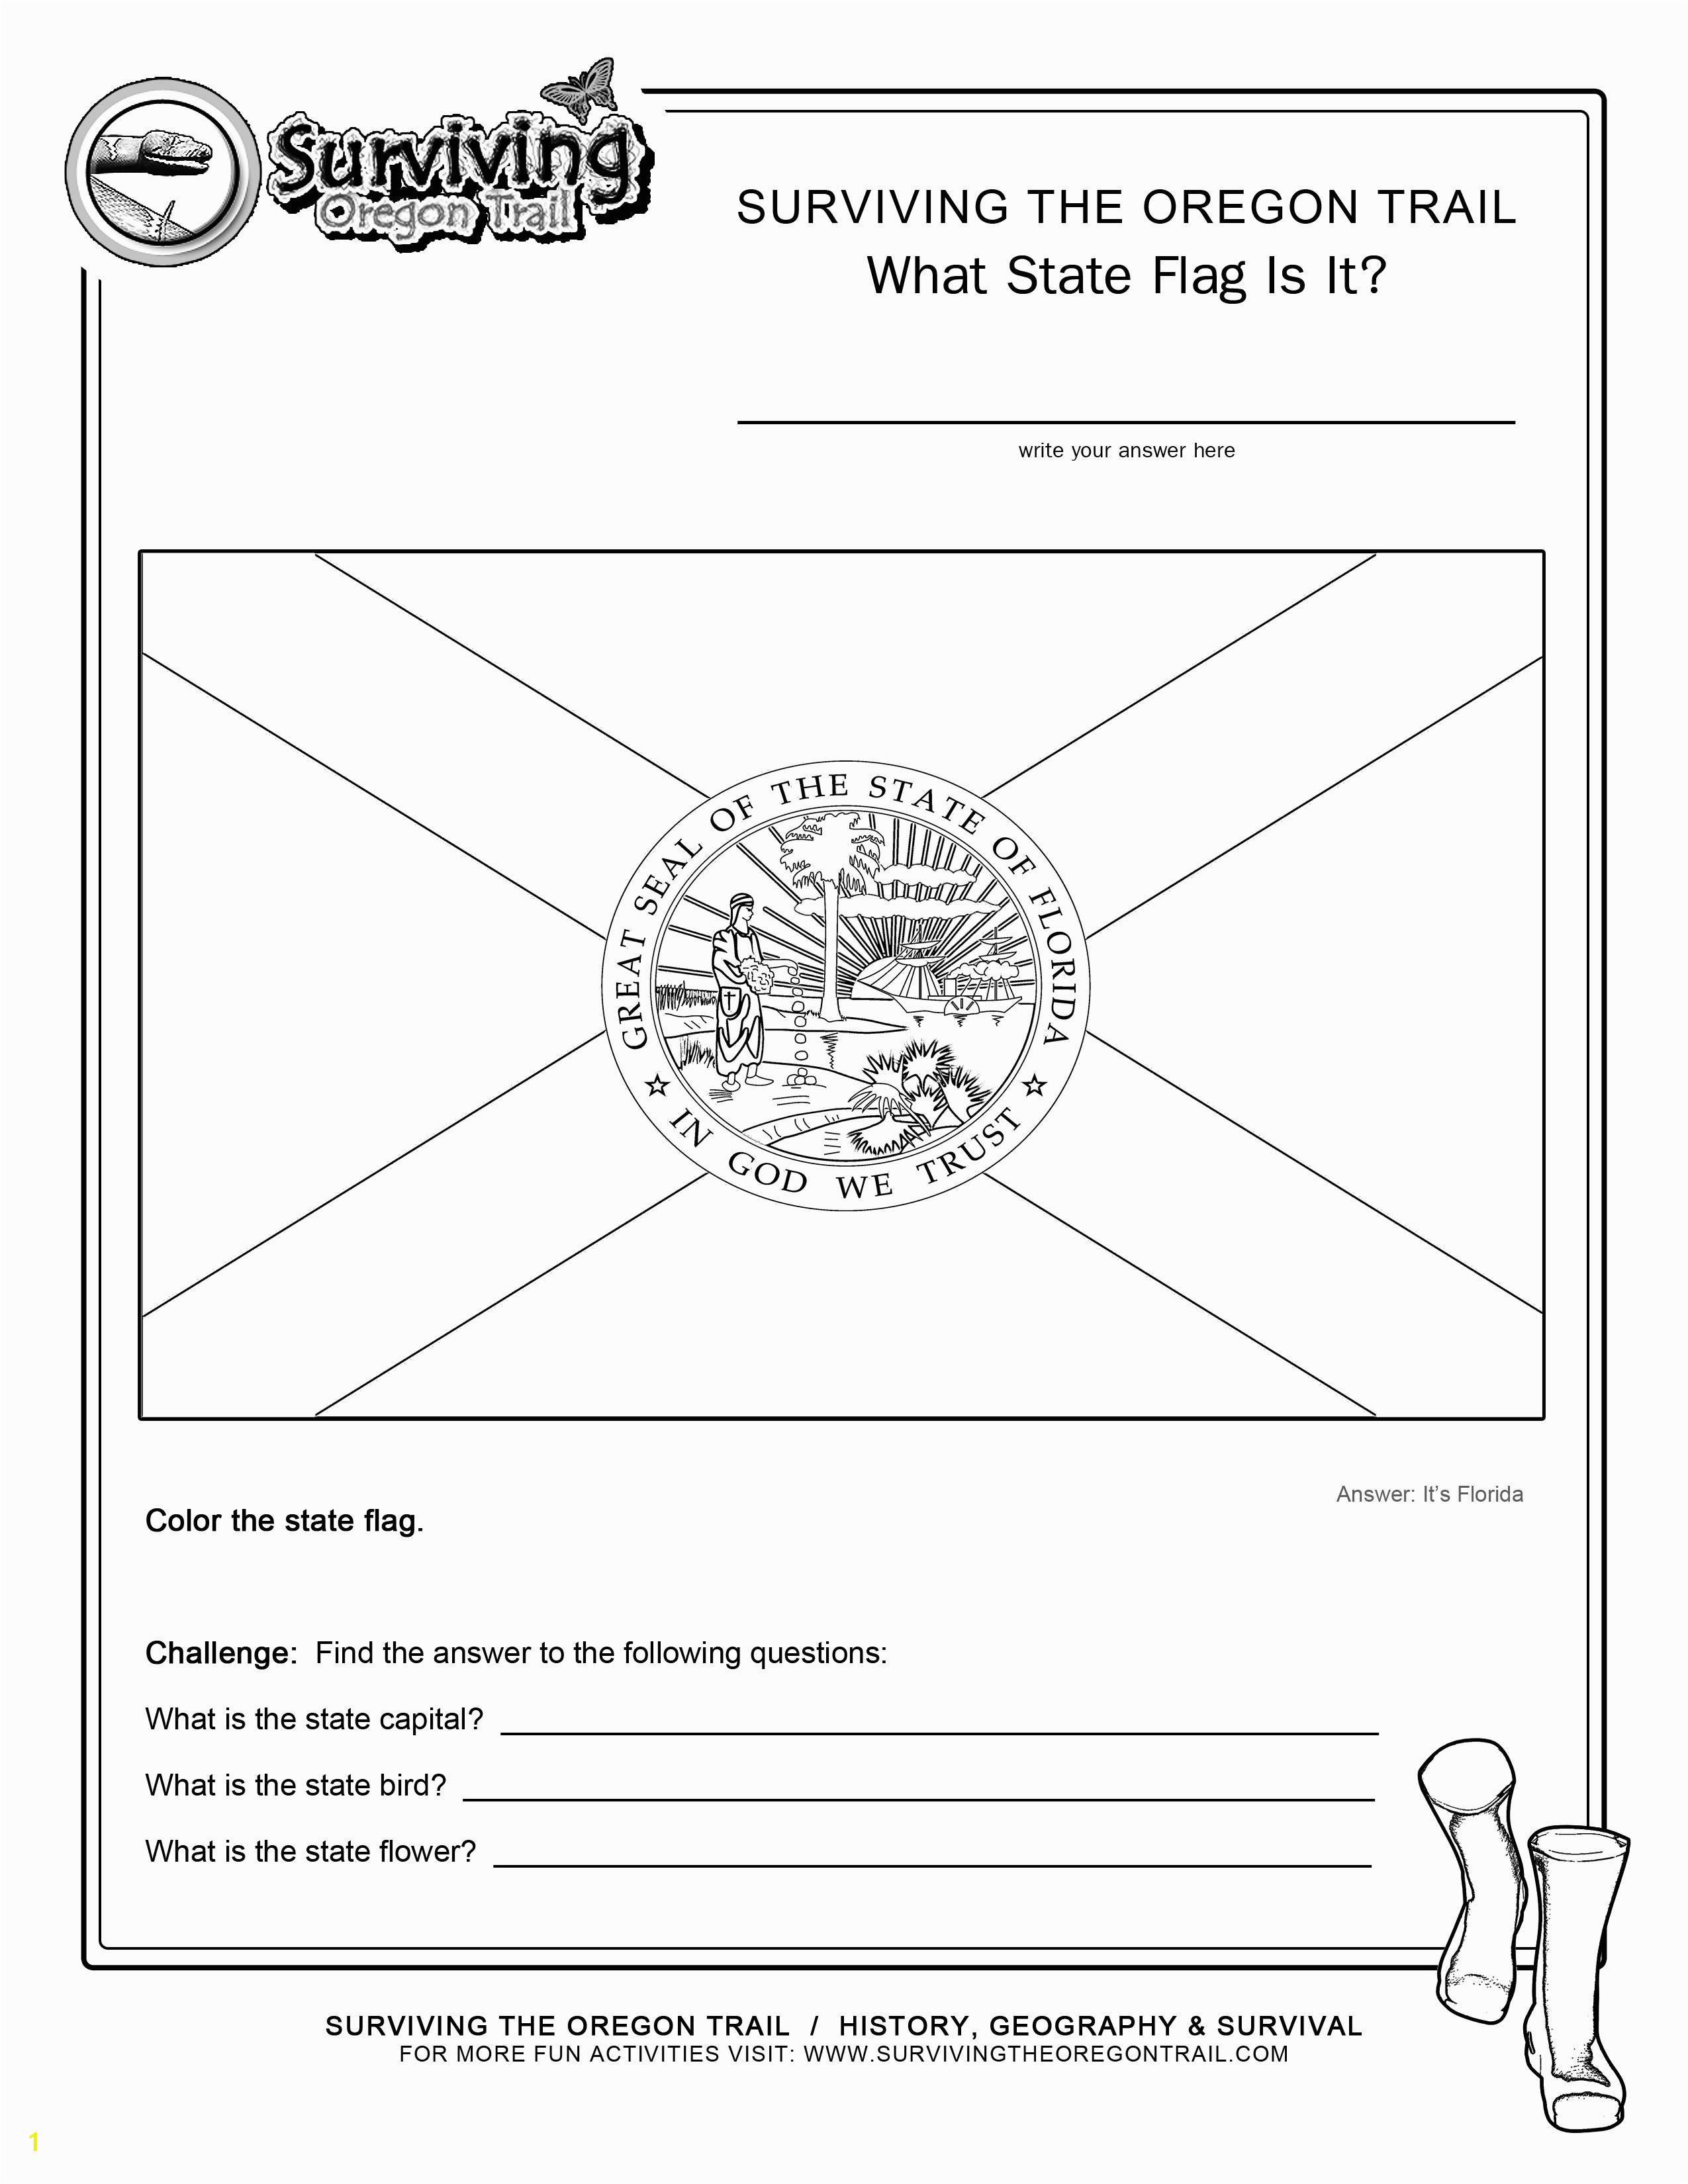 Coloring Pages Rebel Flags State Flags Coloring Pages Unique Coloring Page State Flag Florida